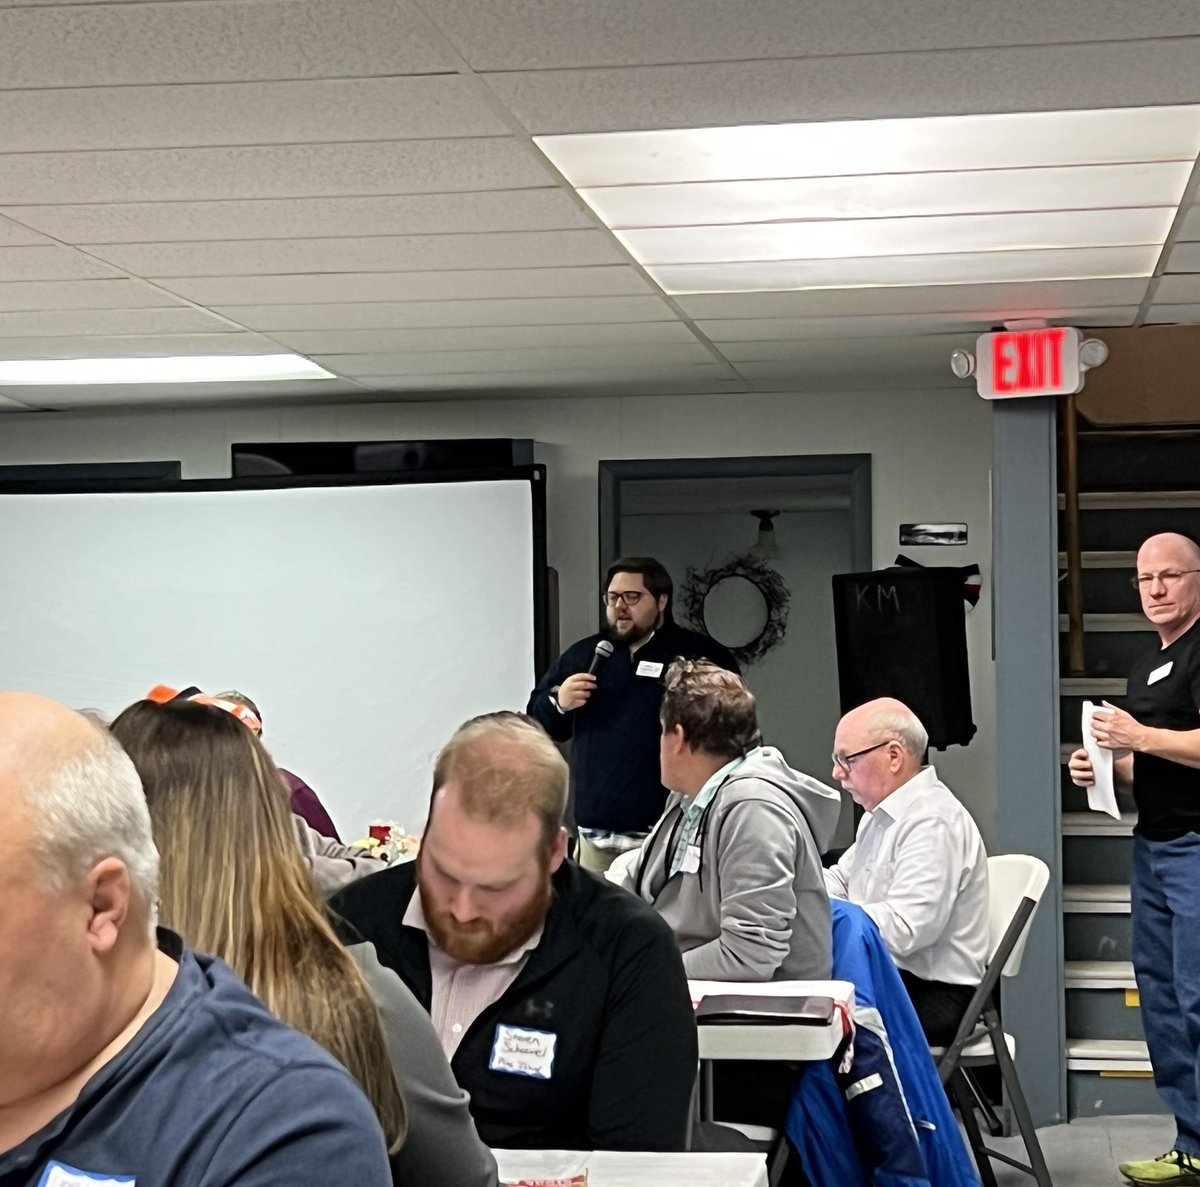 SEMLM Annual Membership meeting in Kasson. Christian Torkelson @MinnesotaCities new cybersecurity loss control staff member is guest speaker. Experience and stories from city officials prove that cyber security is an important issue for all #MnCities